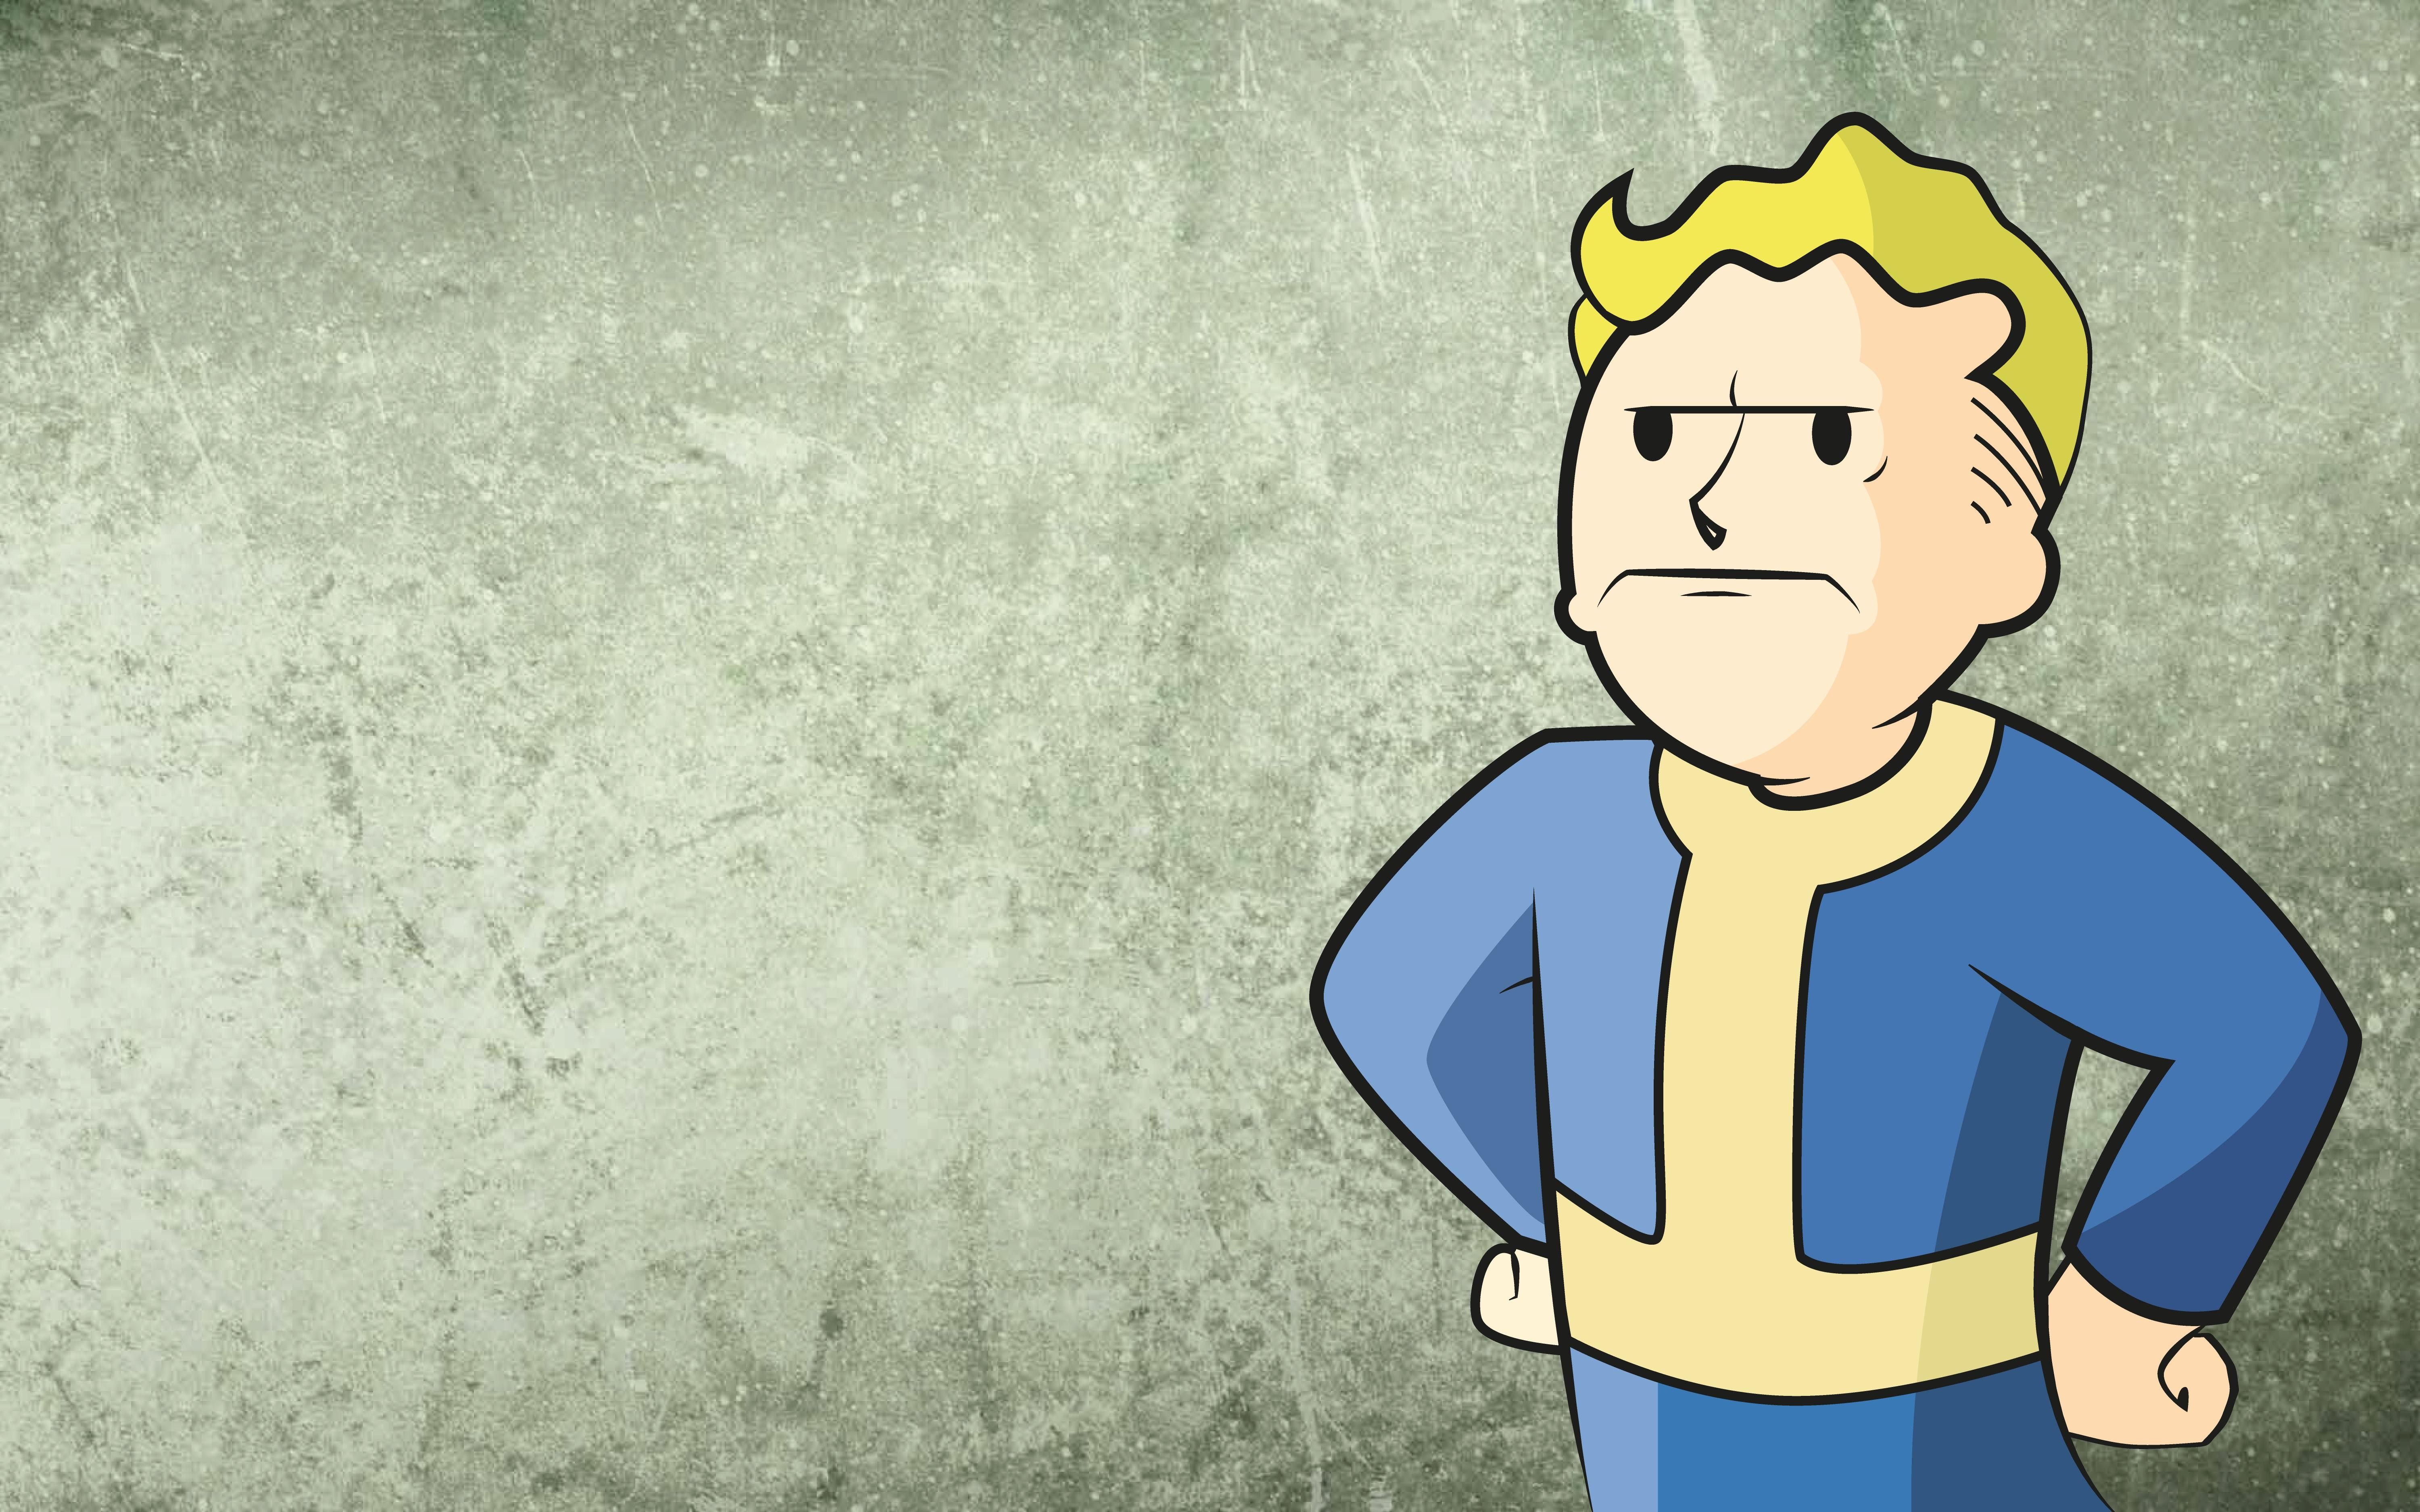 Download the Angry Vault Boy Wallpaper, Angry Vault Boy iPhone